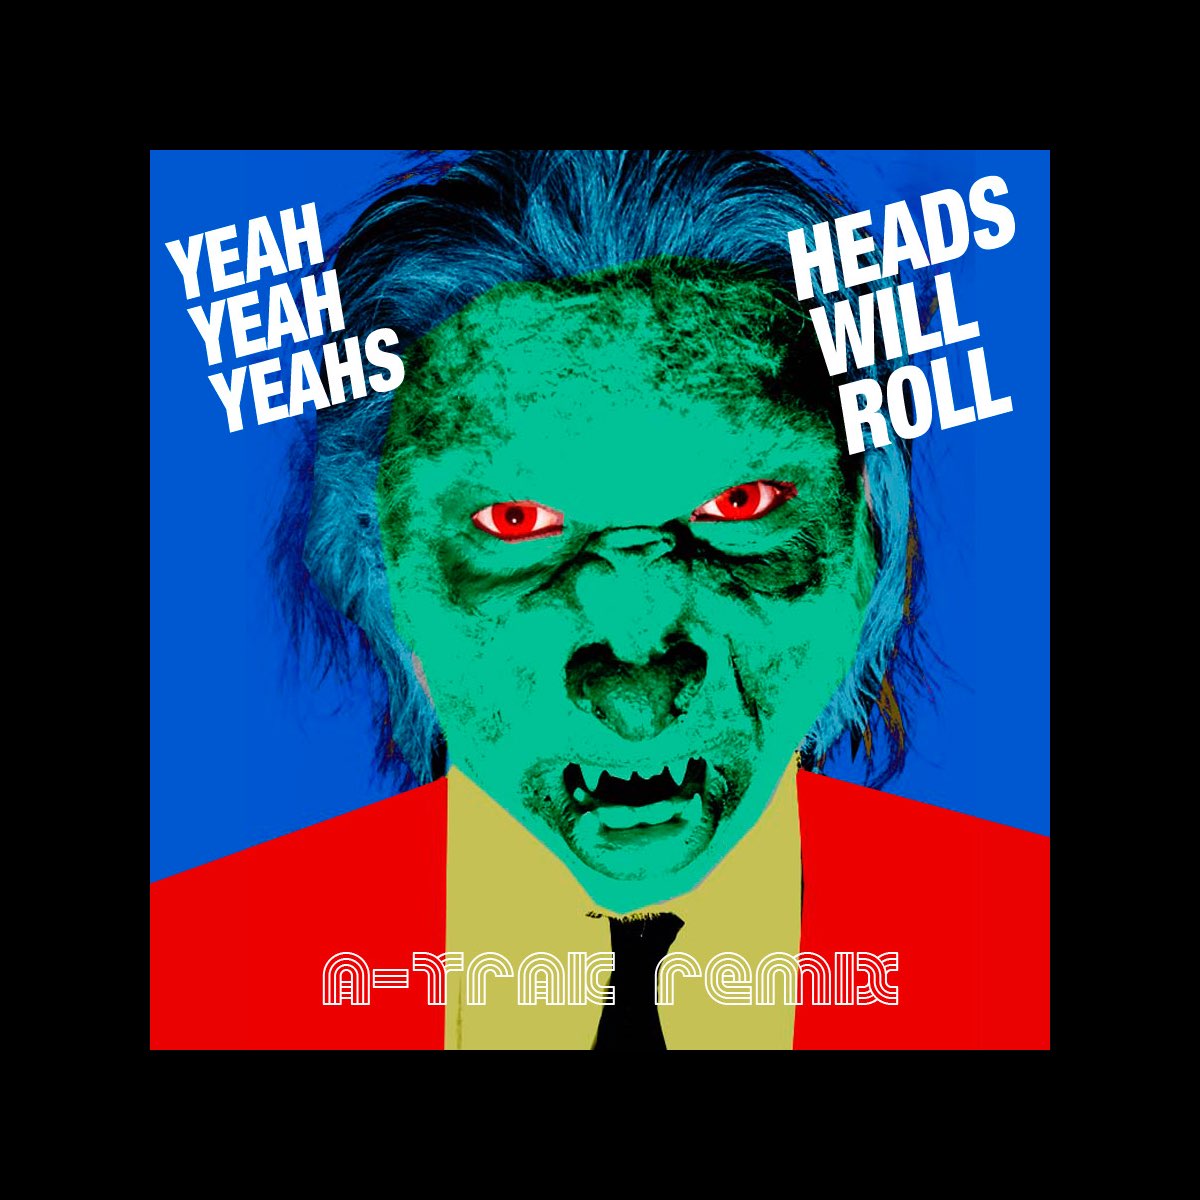 Heads Will Roll (A-Trak Remix) - Single by Yeah Yeah Yeahs on Apple Music